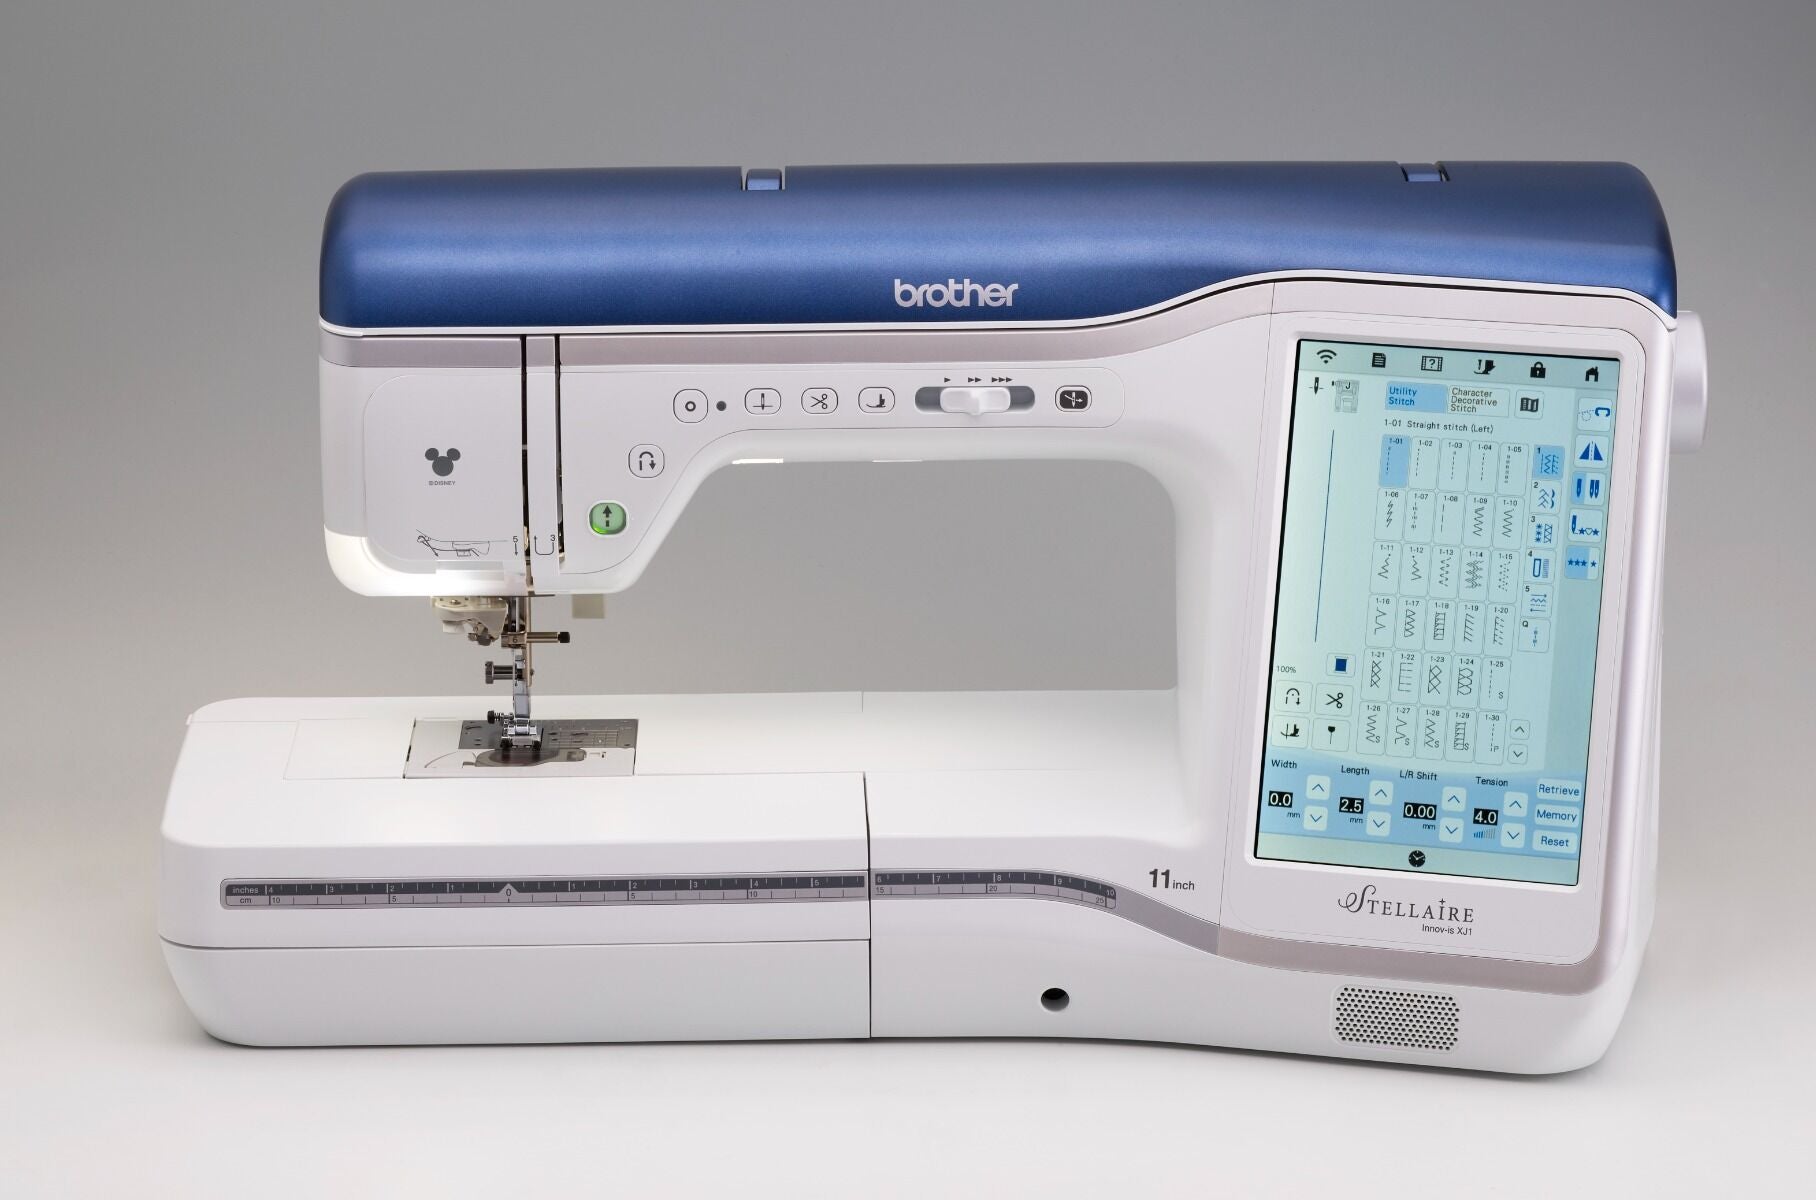 Embroidery Machine Reviews - The Social Stitchery